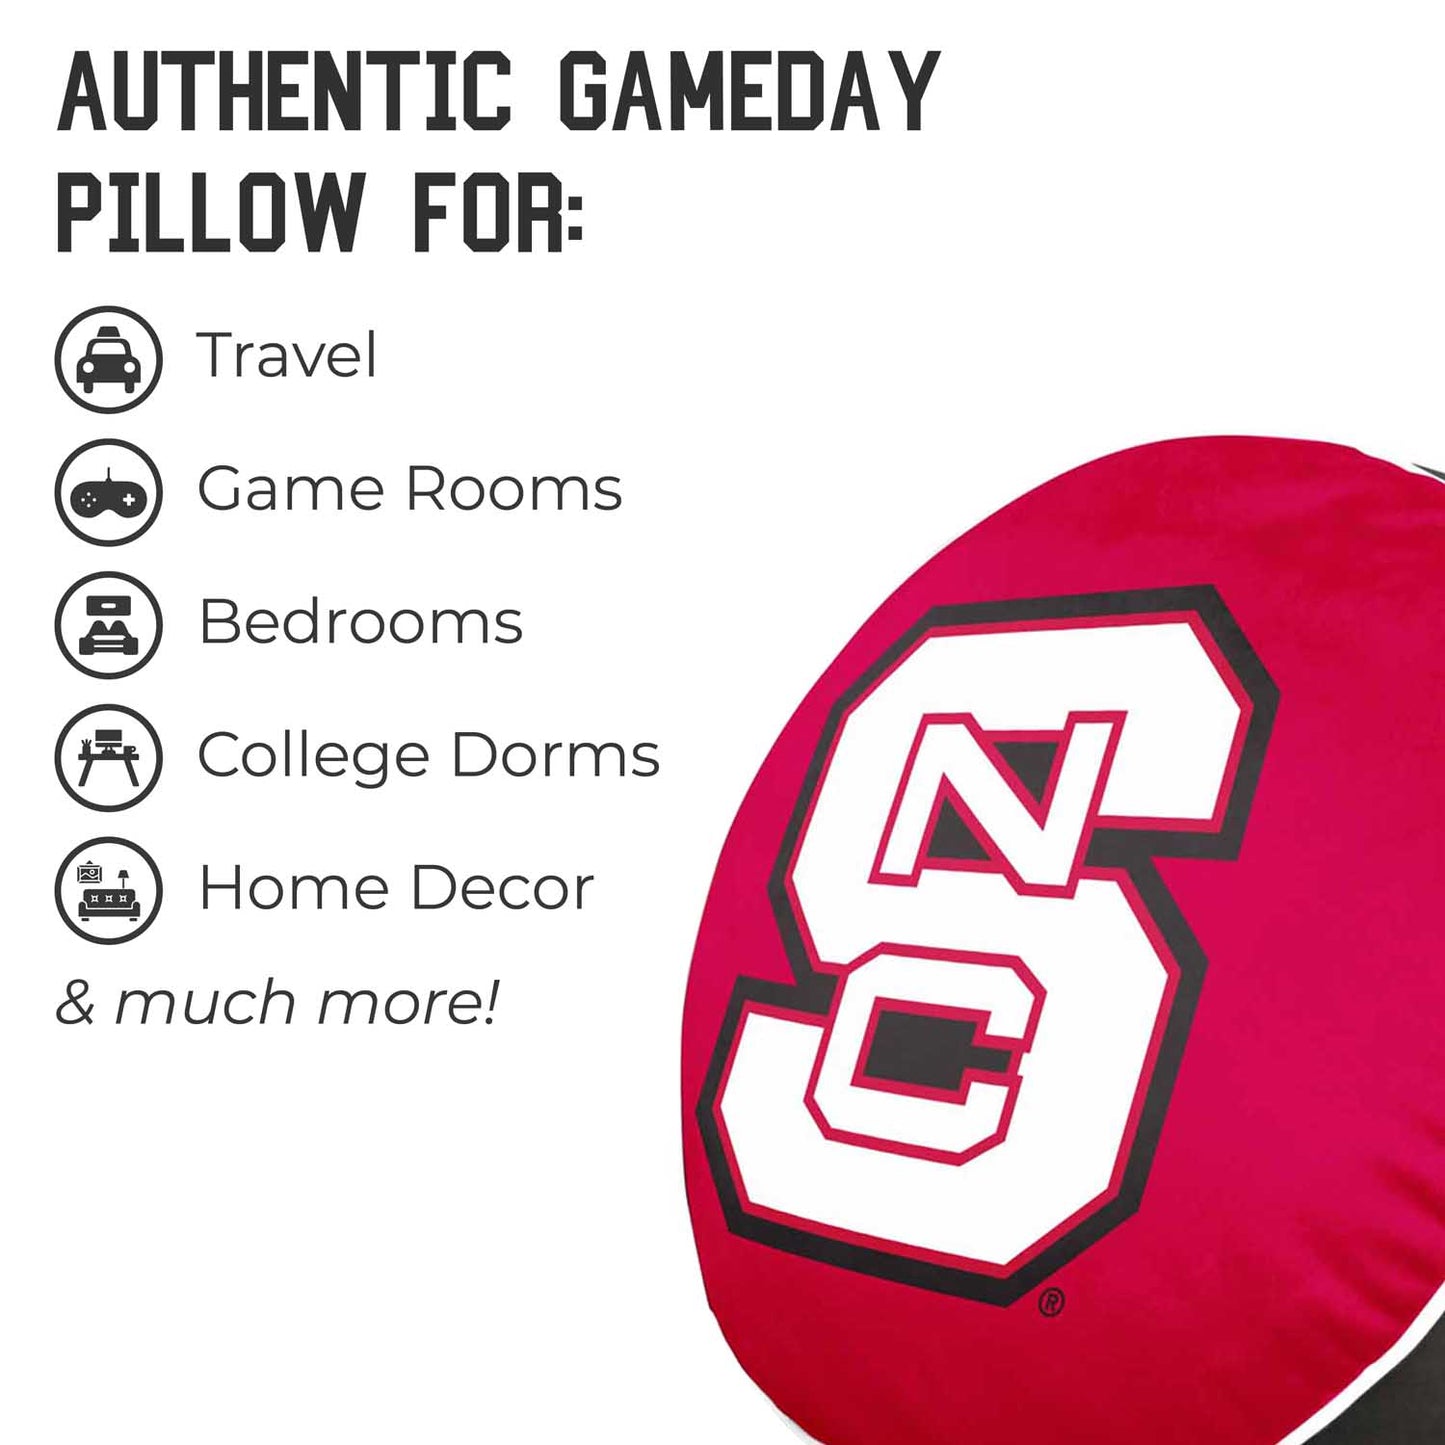 NC State Wolfpack Team Logo 15 Inch Ultra Soft Stretch Plush Pillow - Red